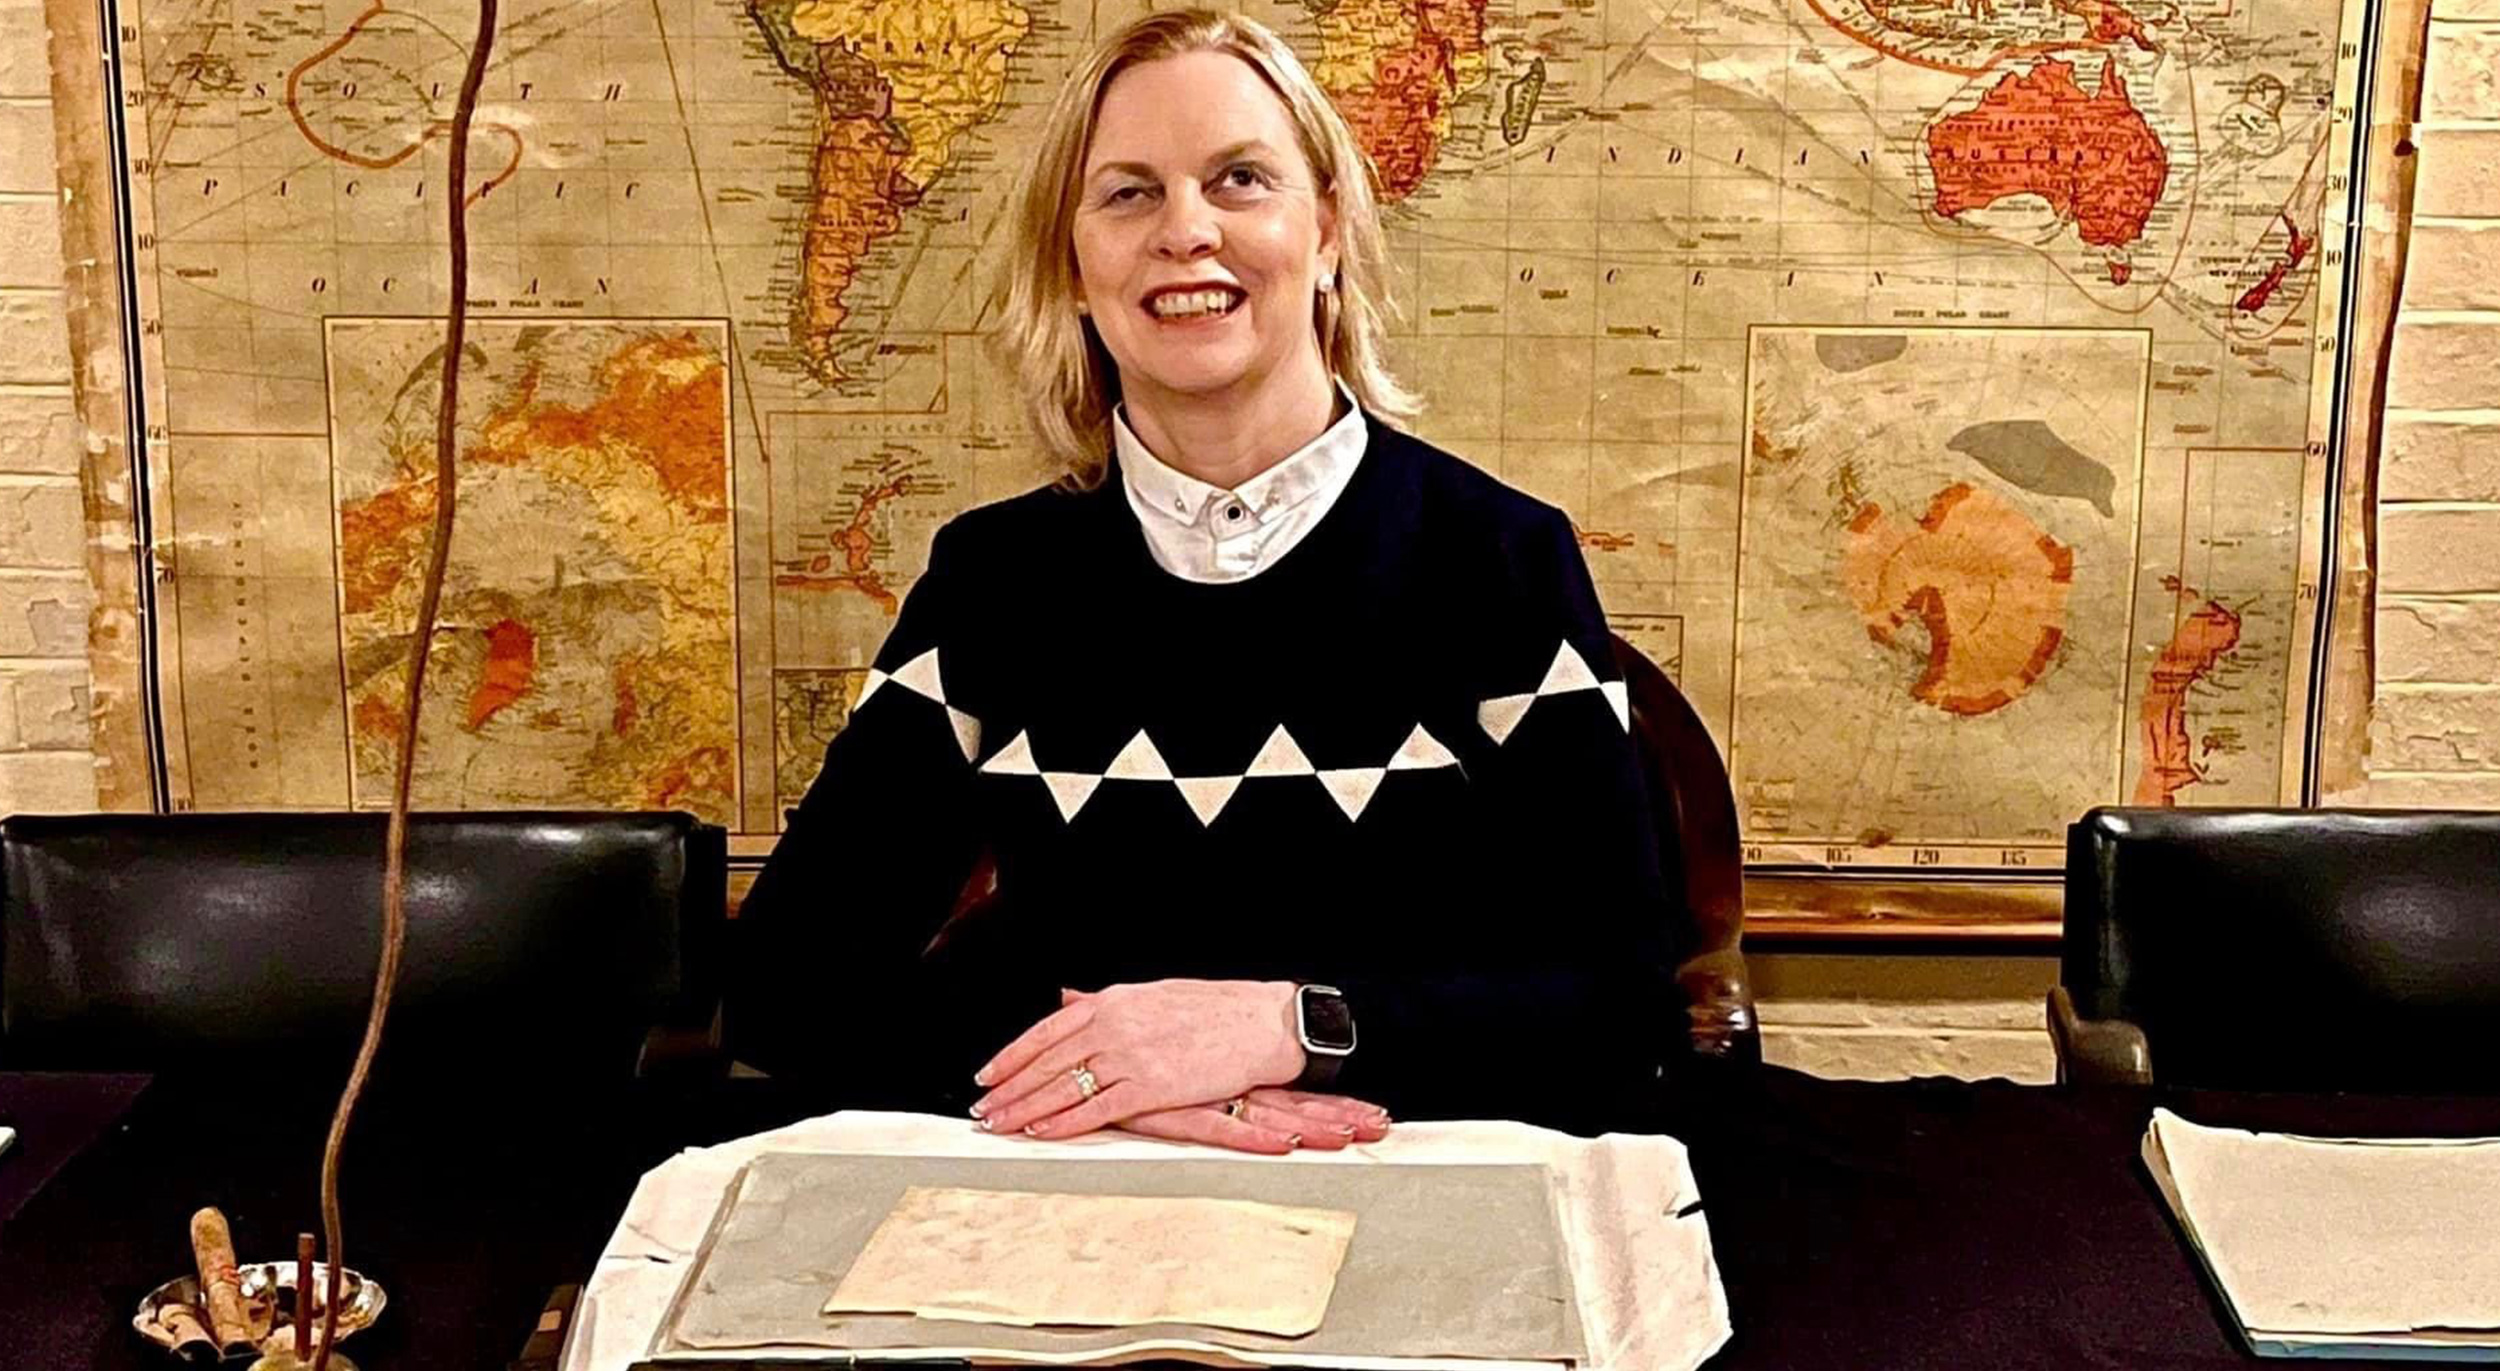 Donna, a woman with short blonde hair, is wearing a collared shirt and black jumper with white rectangles. Her hands are folded on her desk.